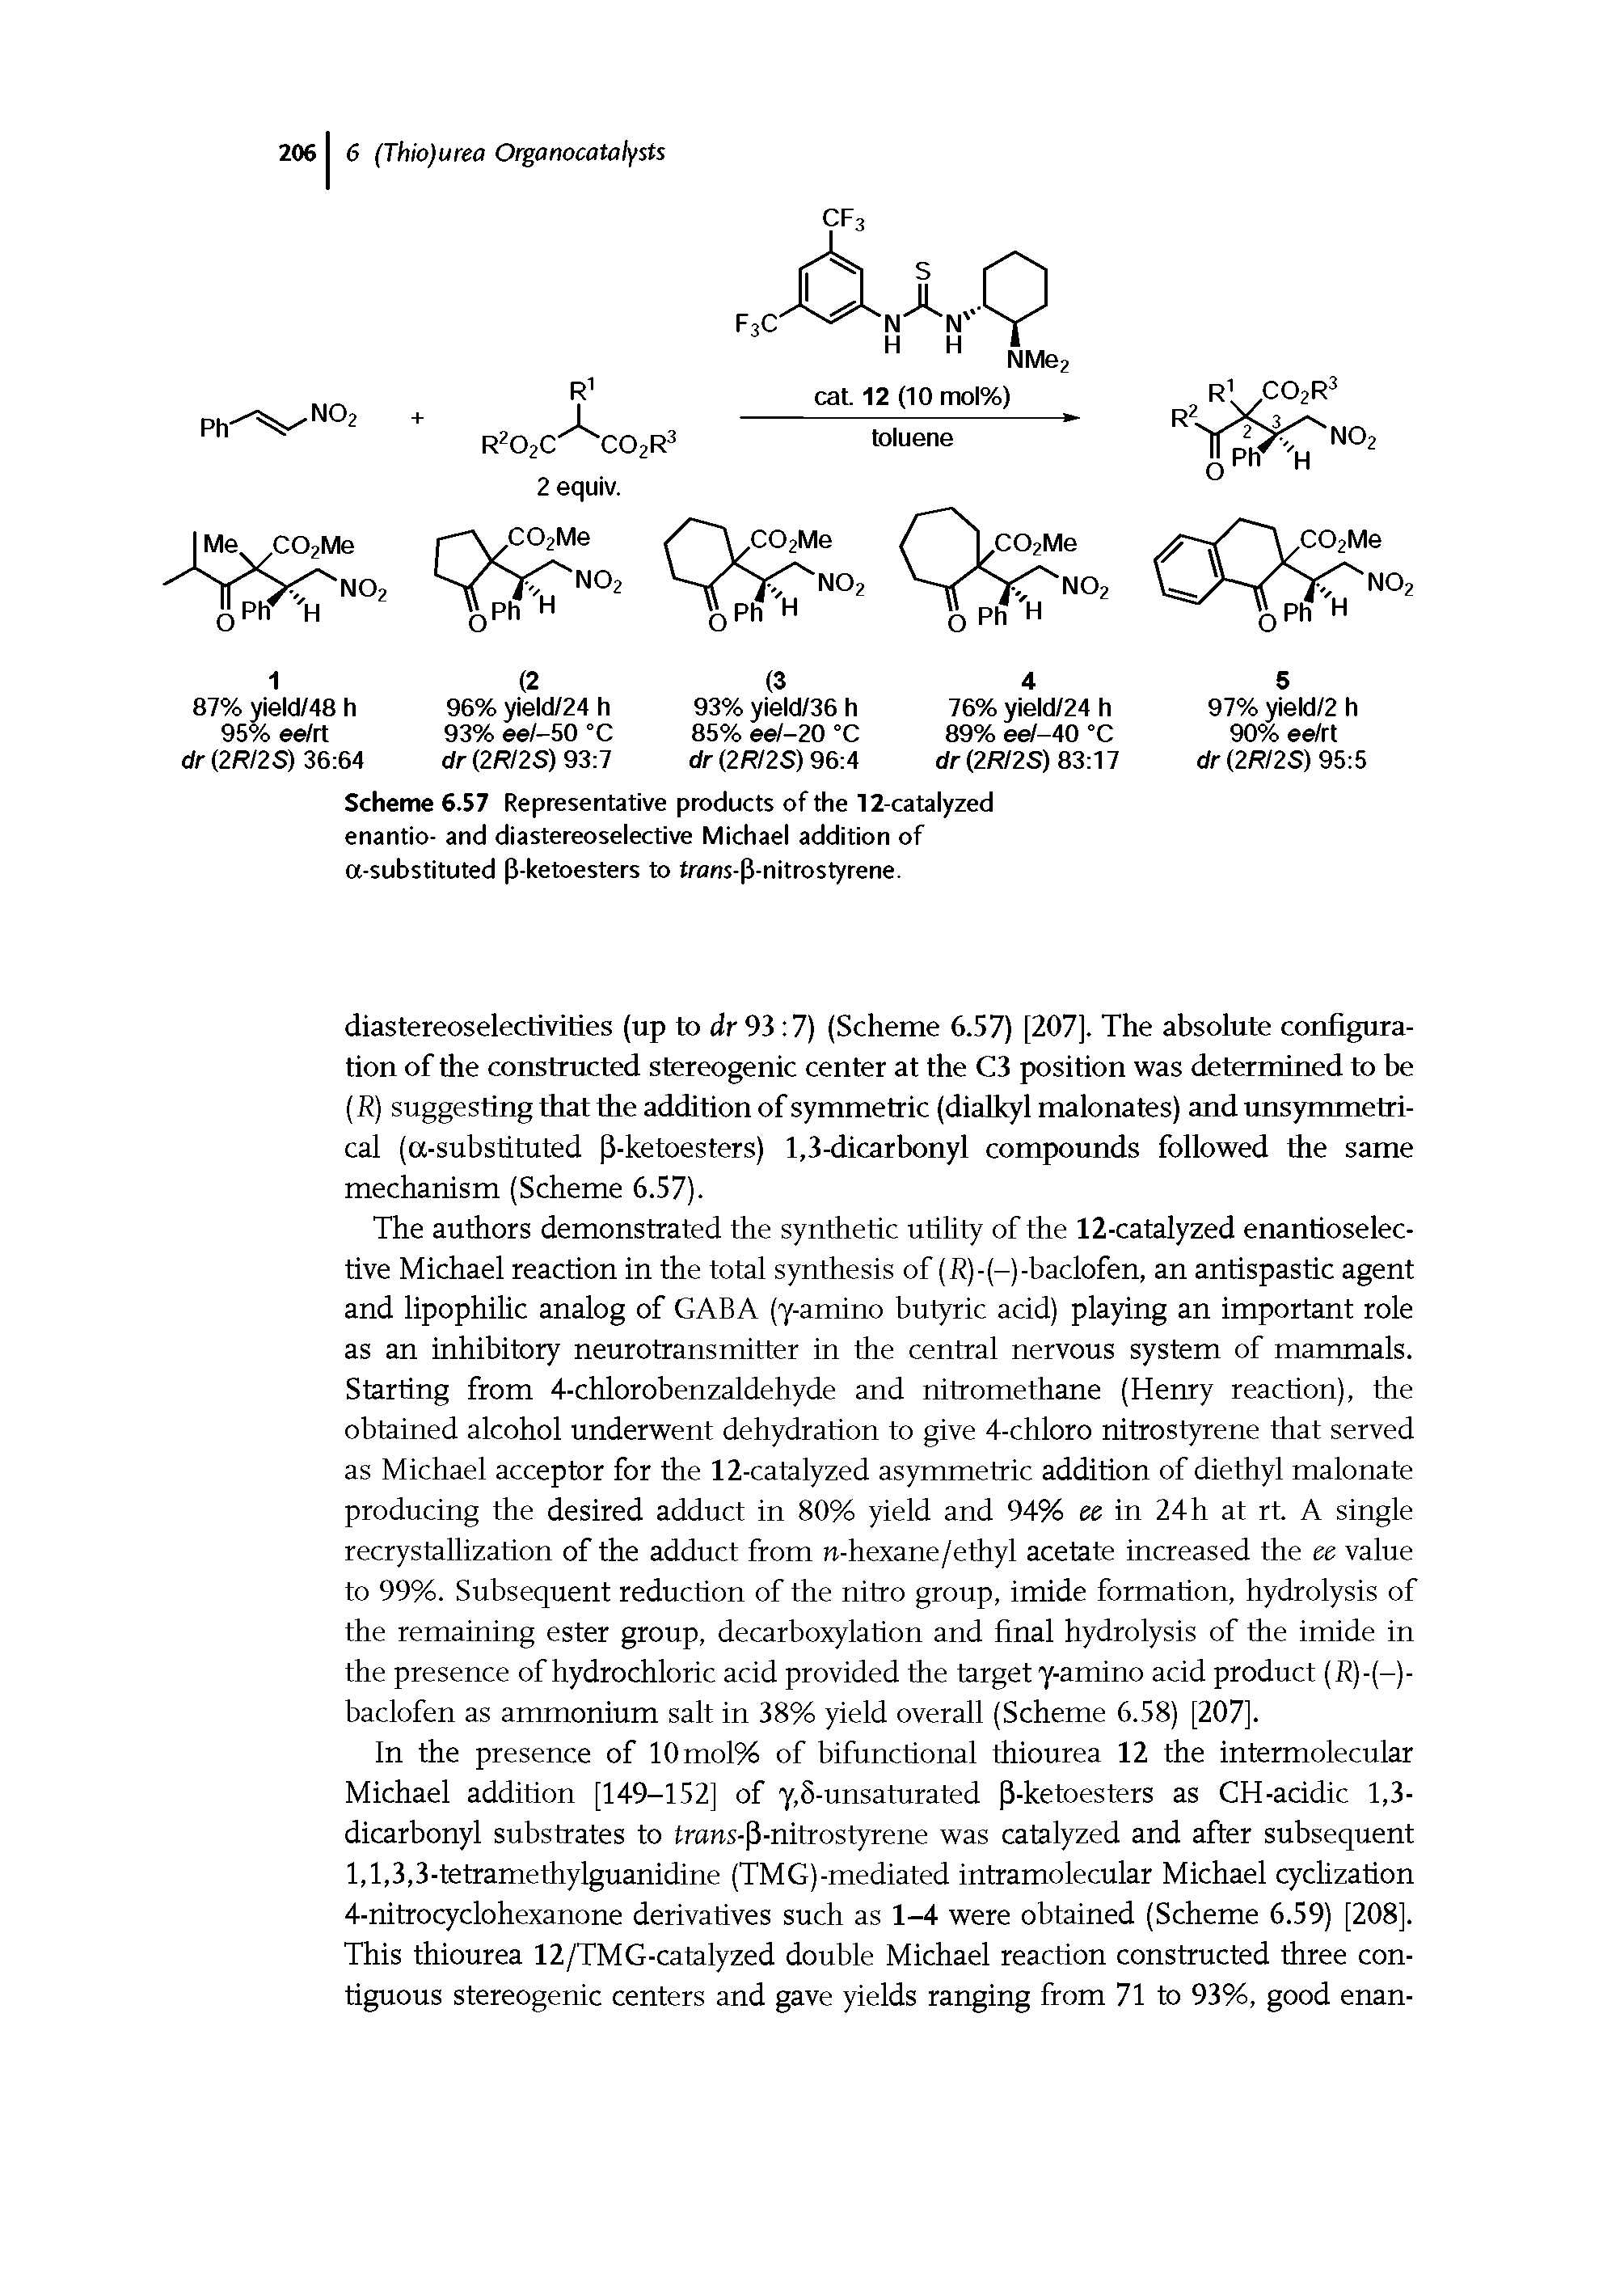 Scheme 6.57 Representative products of the 12-catalyzed enantio- and diastereoselective Michael addition of a-substituted P-ketoesters to trom-P-nitrostyrene.